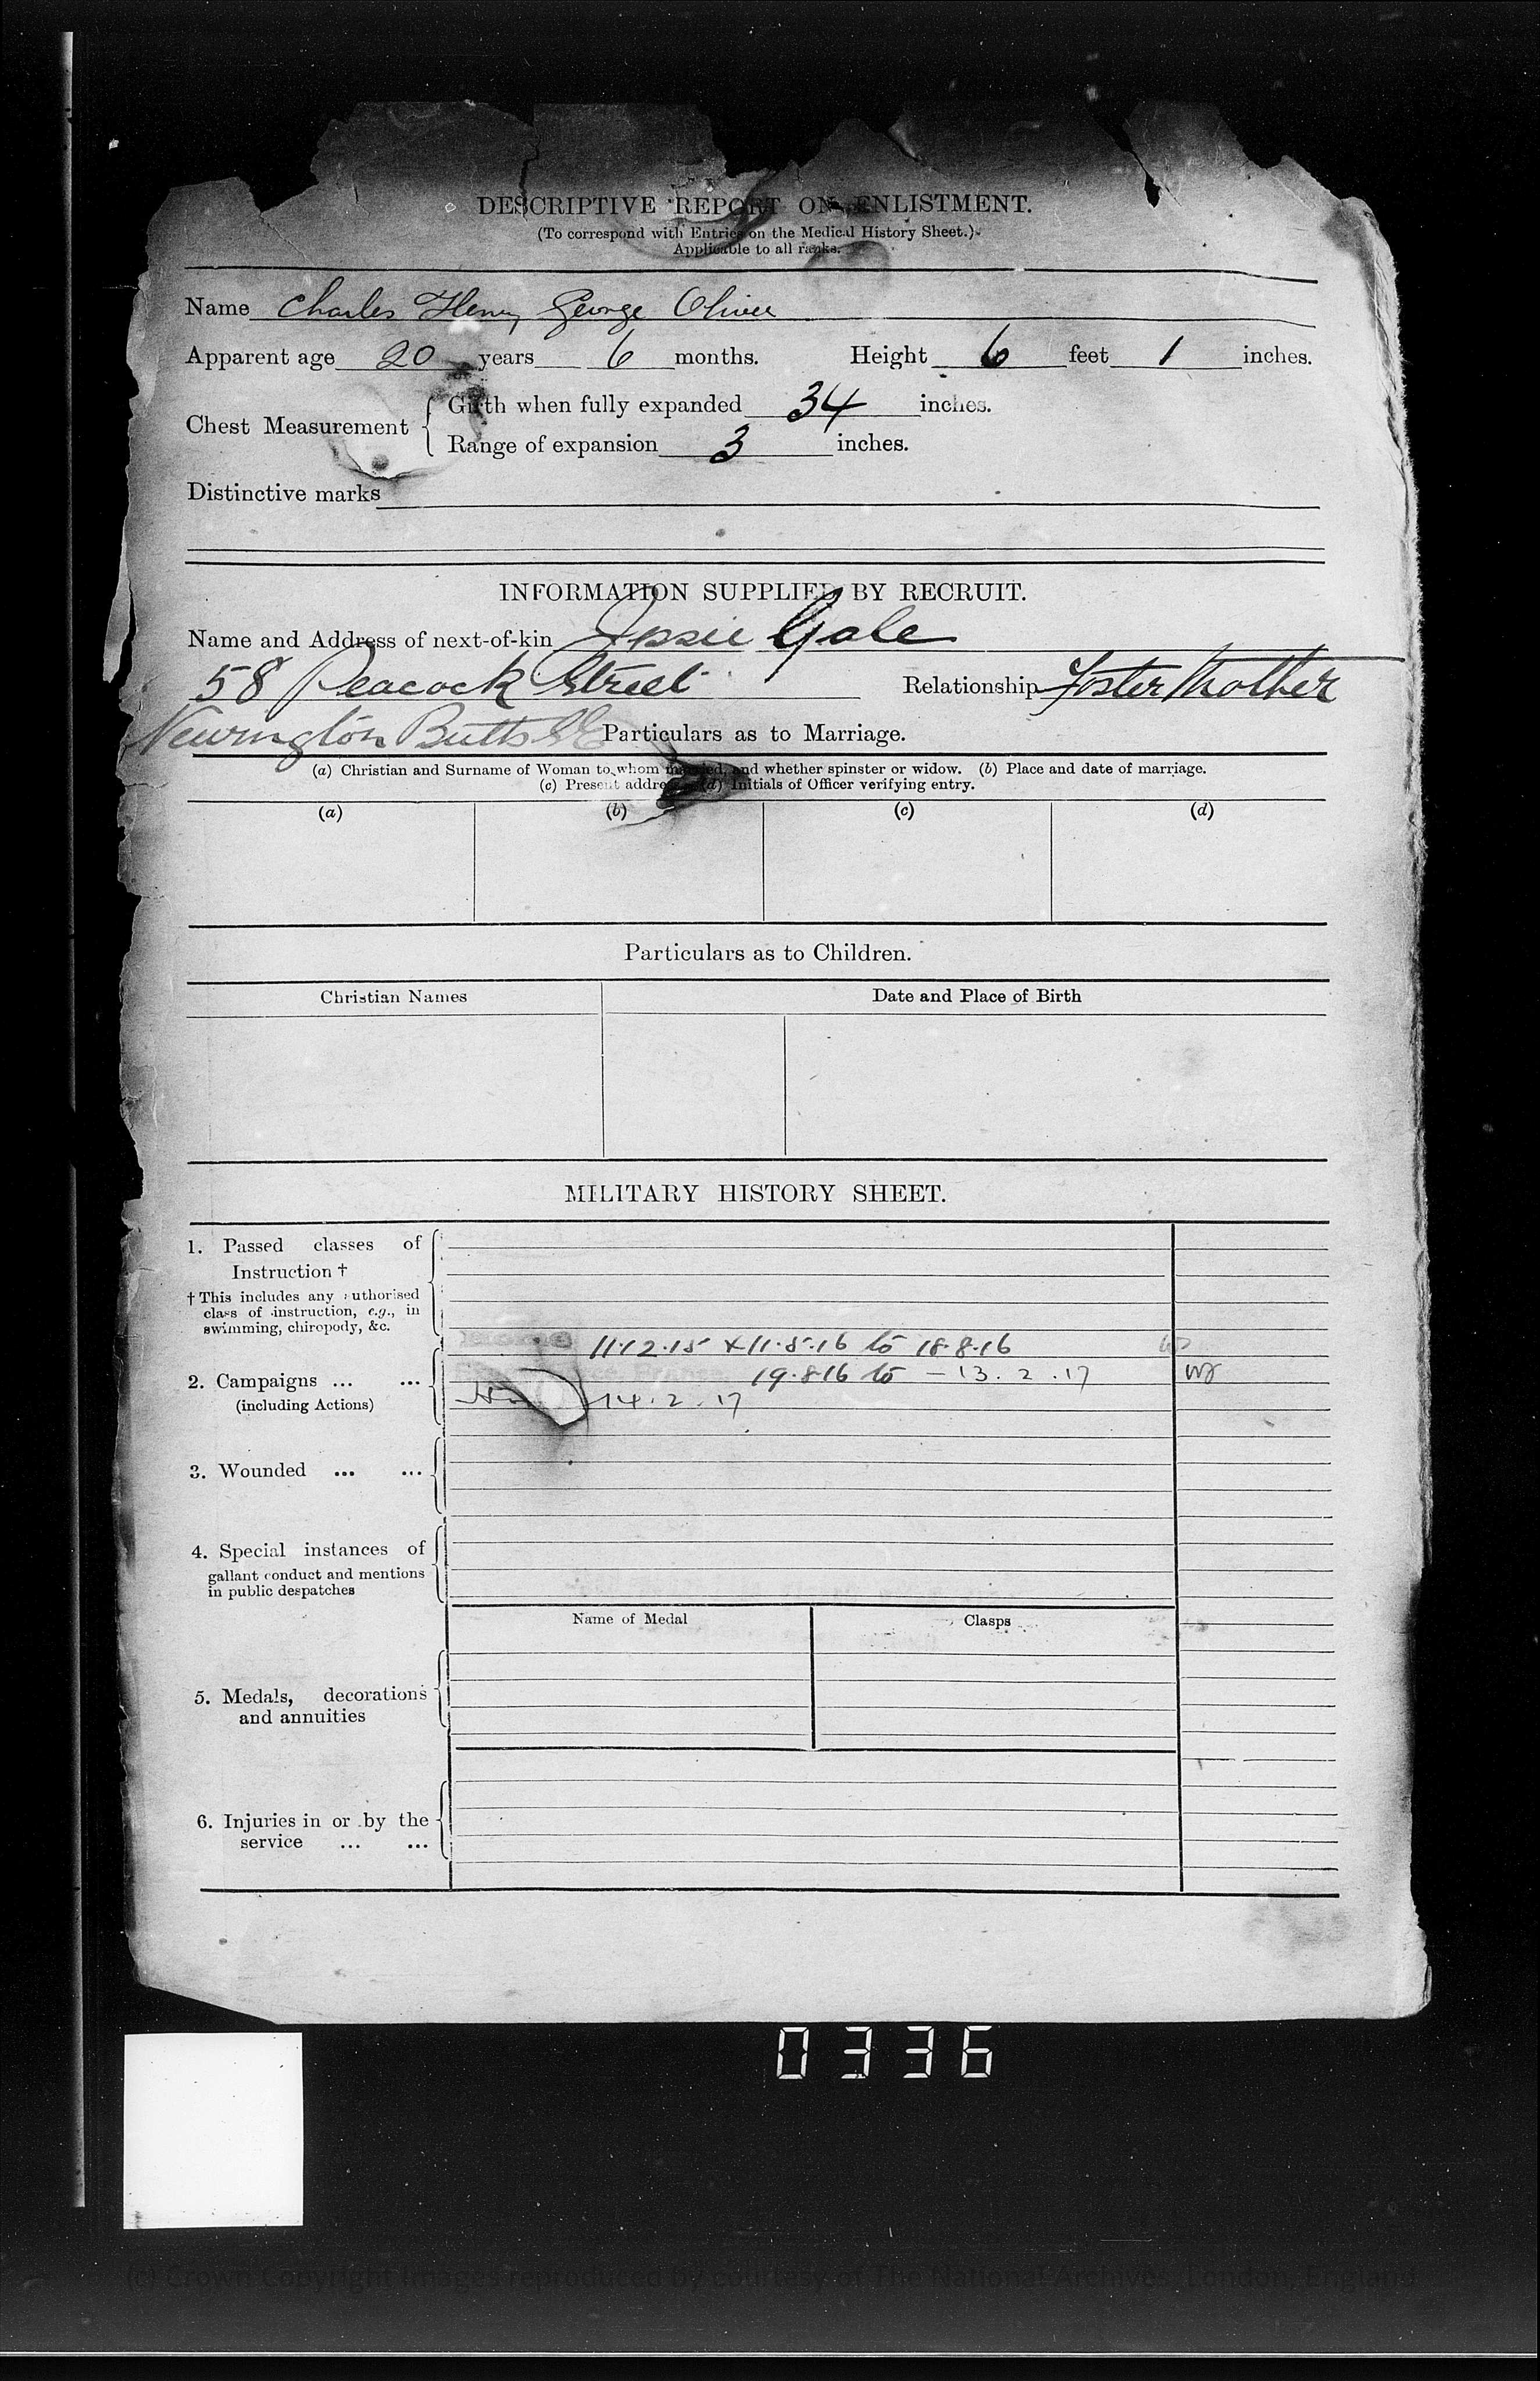 Military papers showing Charles Oliver’s next of kin to be Josie Gale, foster mother of 58 Peacock Street